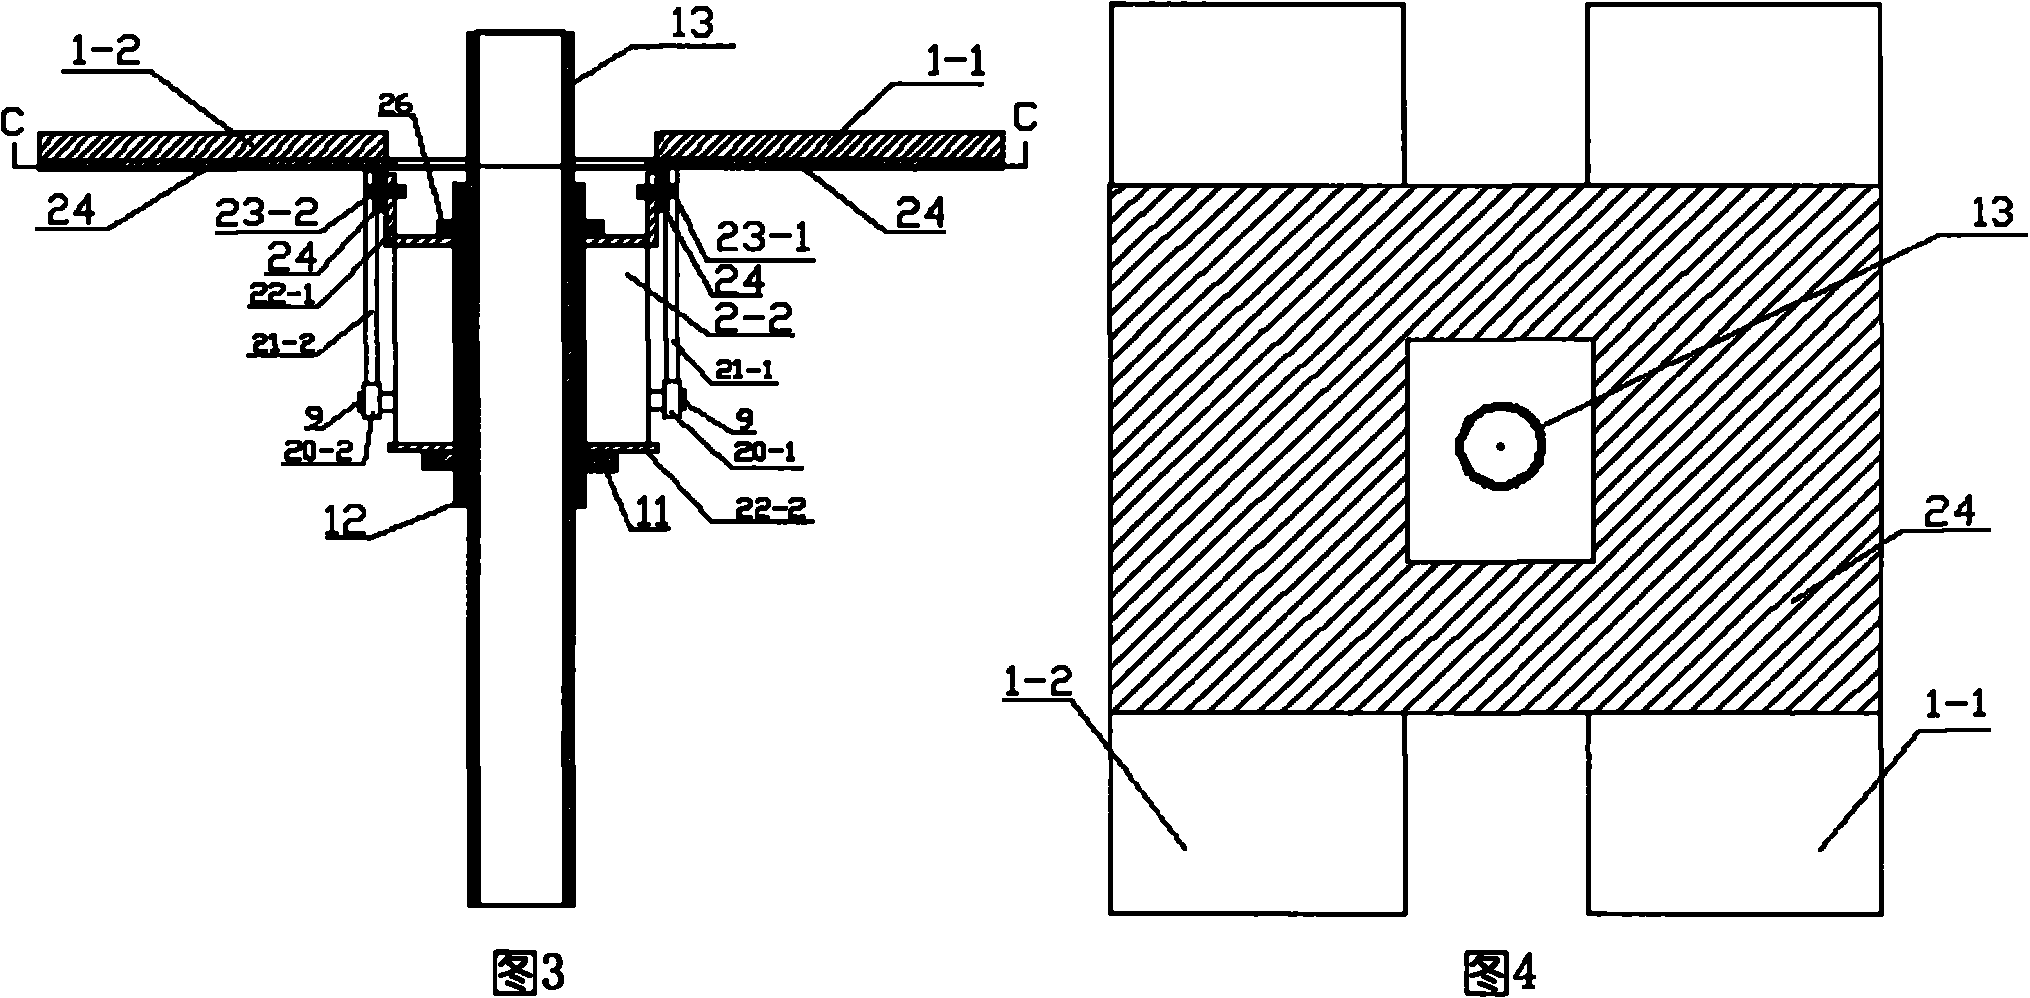 Large-power soft-driving pitch tracking three-dimensional solar light collecting device